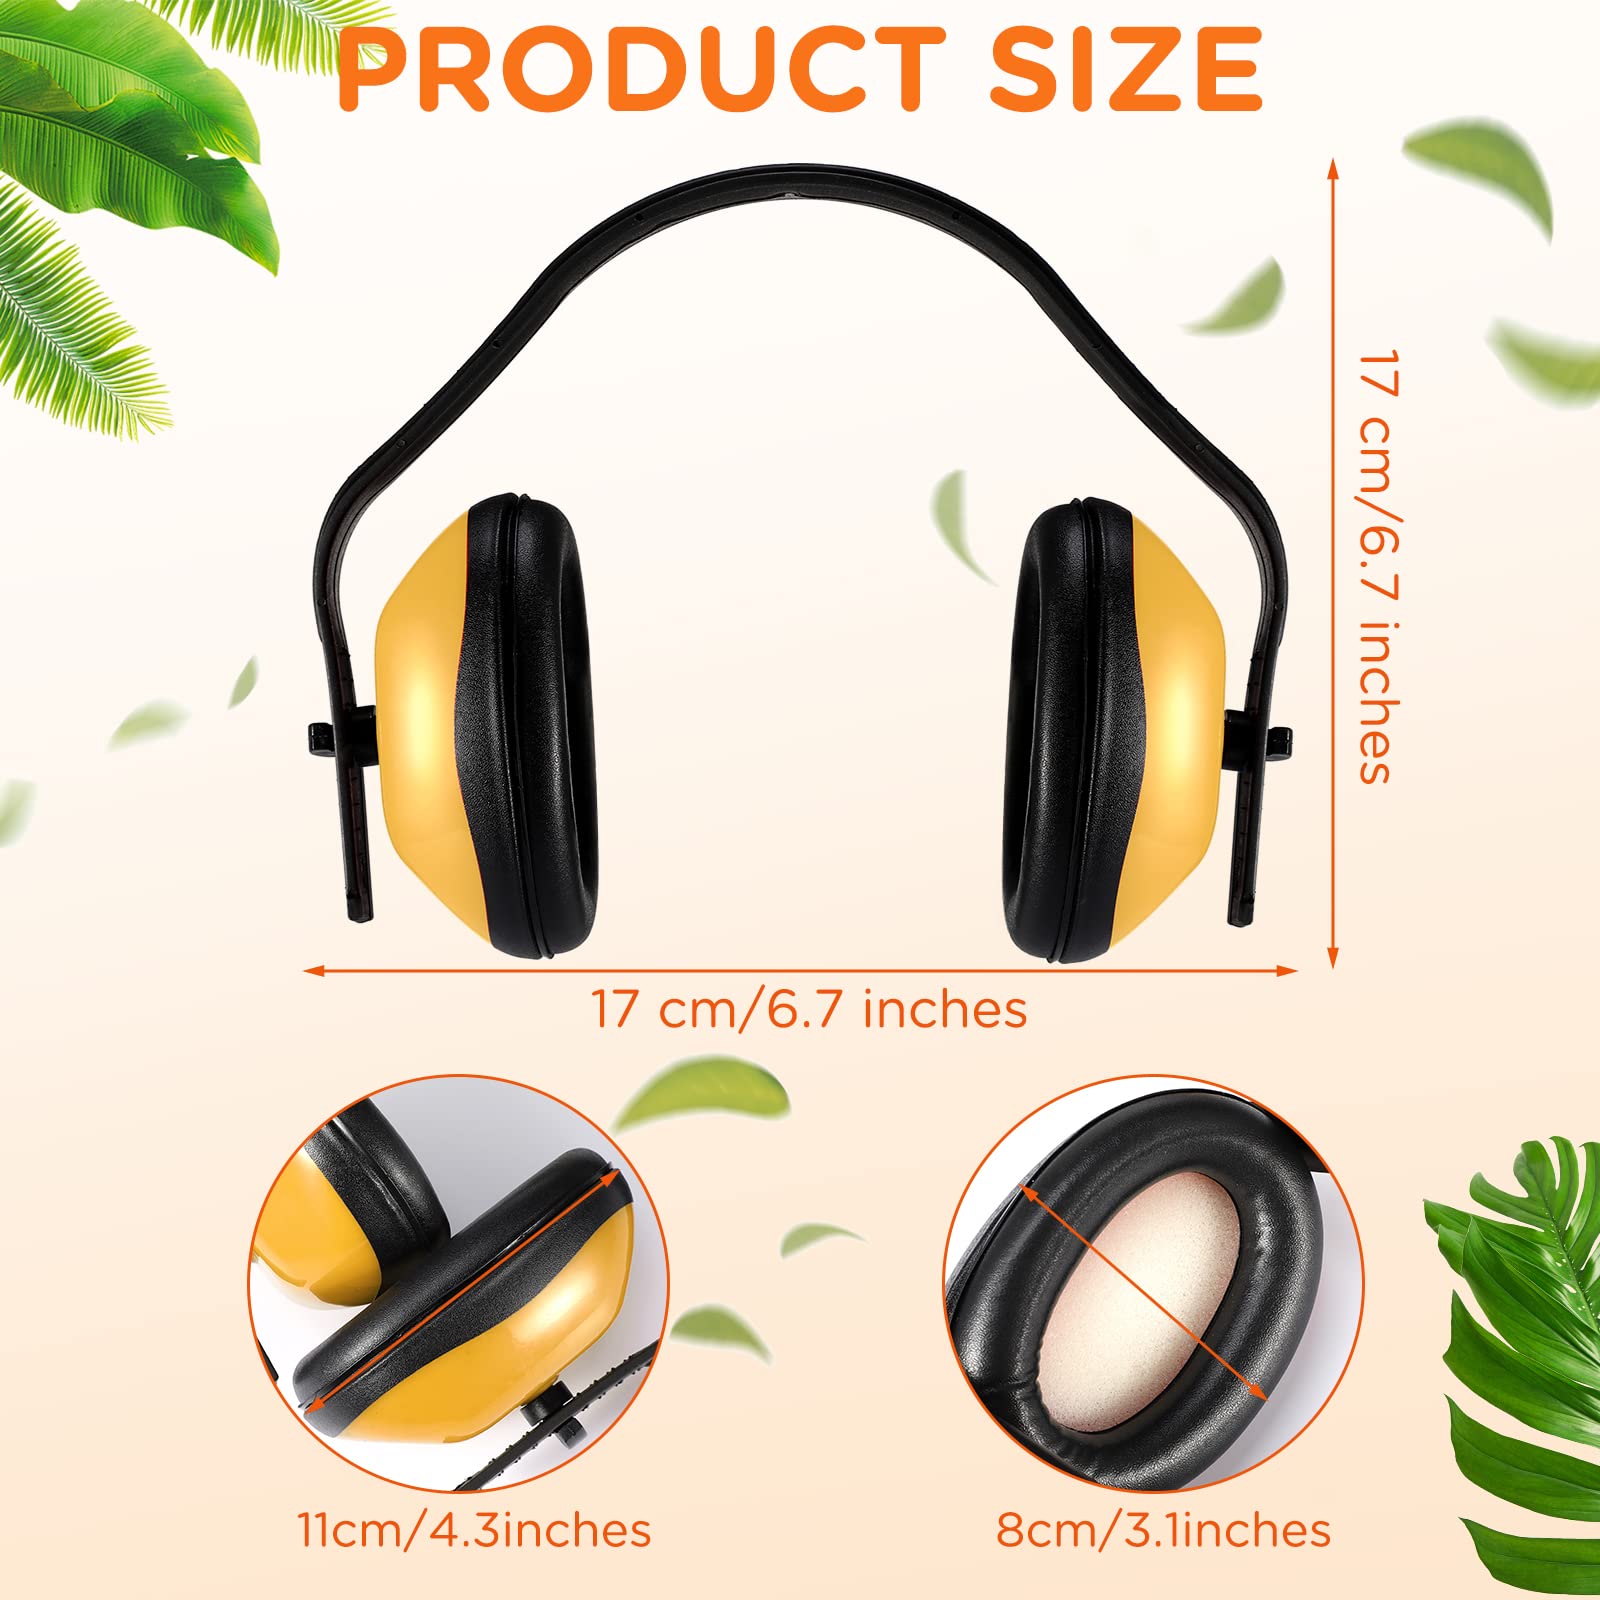 Maitys 6 Pcs Soundproof Earmuffs Hearing Protection Headphones Adjustable Padded Defender Noise Reduction Earplug for Kids (Yellow)